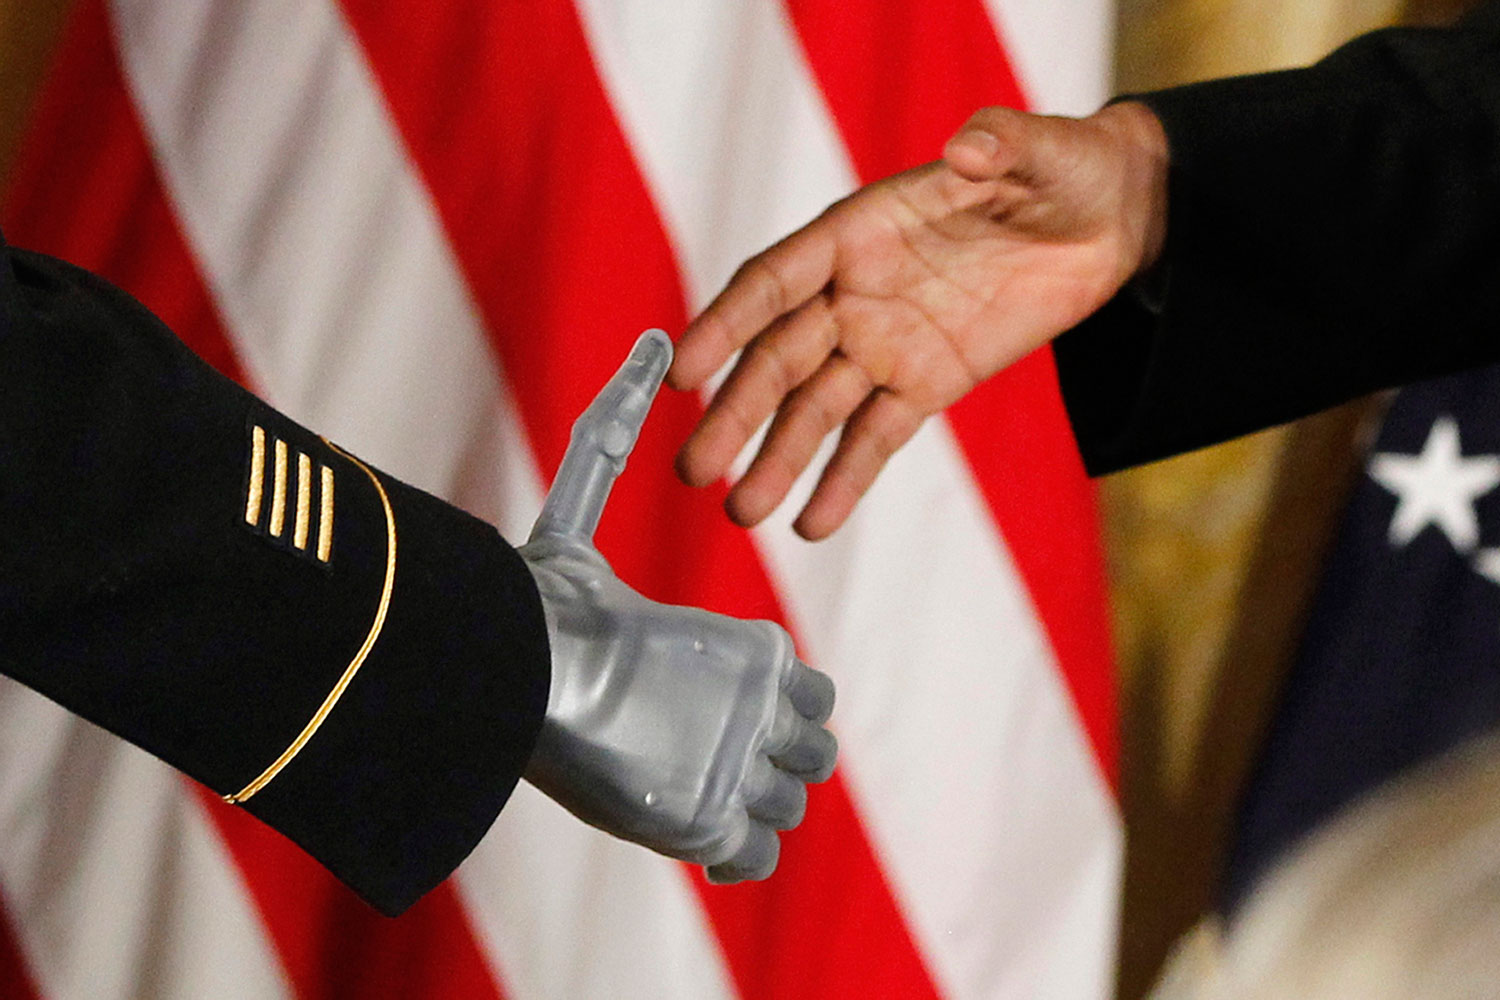 July 12, 2011. President Barack Obama shakes the prosthetic hand of U.S. Army Sgt. First Class Leroy Arthur Petry of Santa Fe, N.M., who received the Medal of Honor for his valor in Afghanistan in a ceremony in the East Room of the White House in Washington. Petry lost his right hand as he tossed aside a live grenade during a 2008 firefight in Afghanistan, sparing the lives of his fellow Army Rangers.